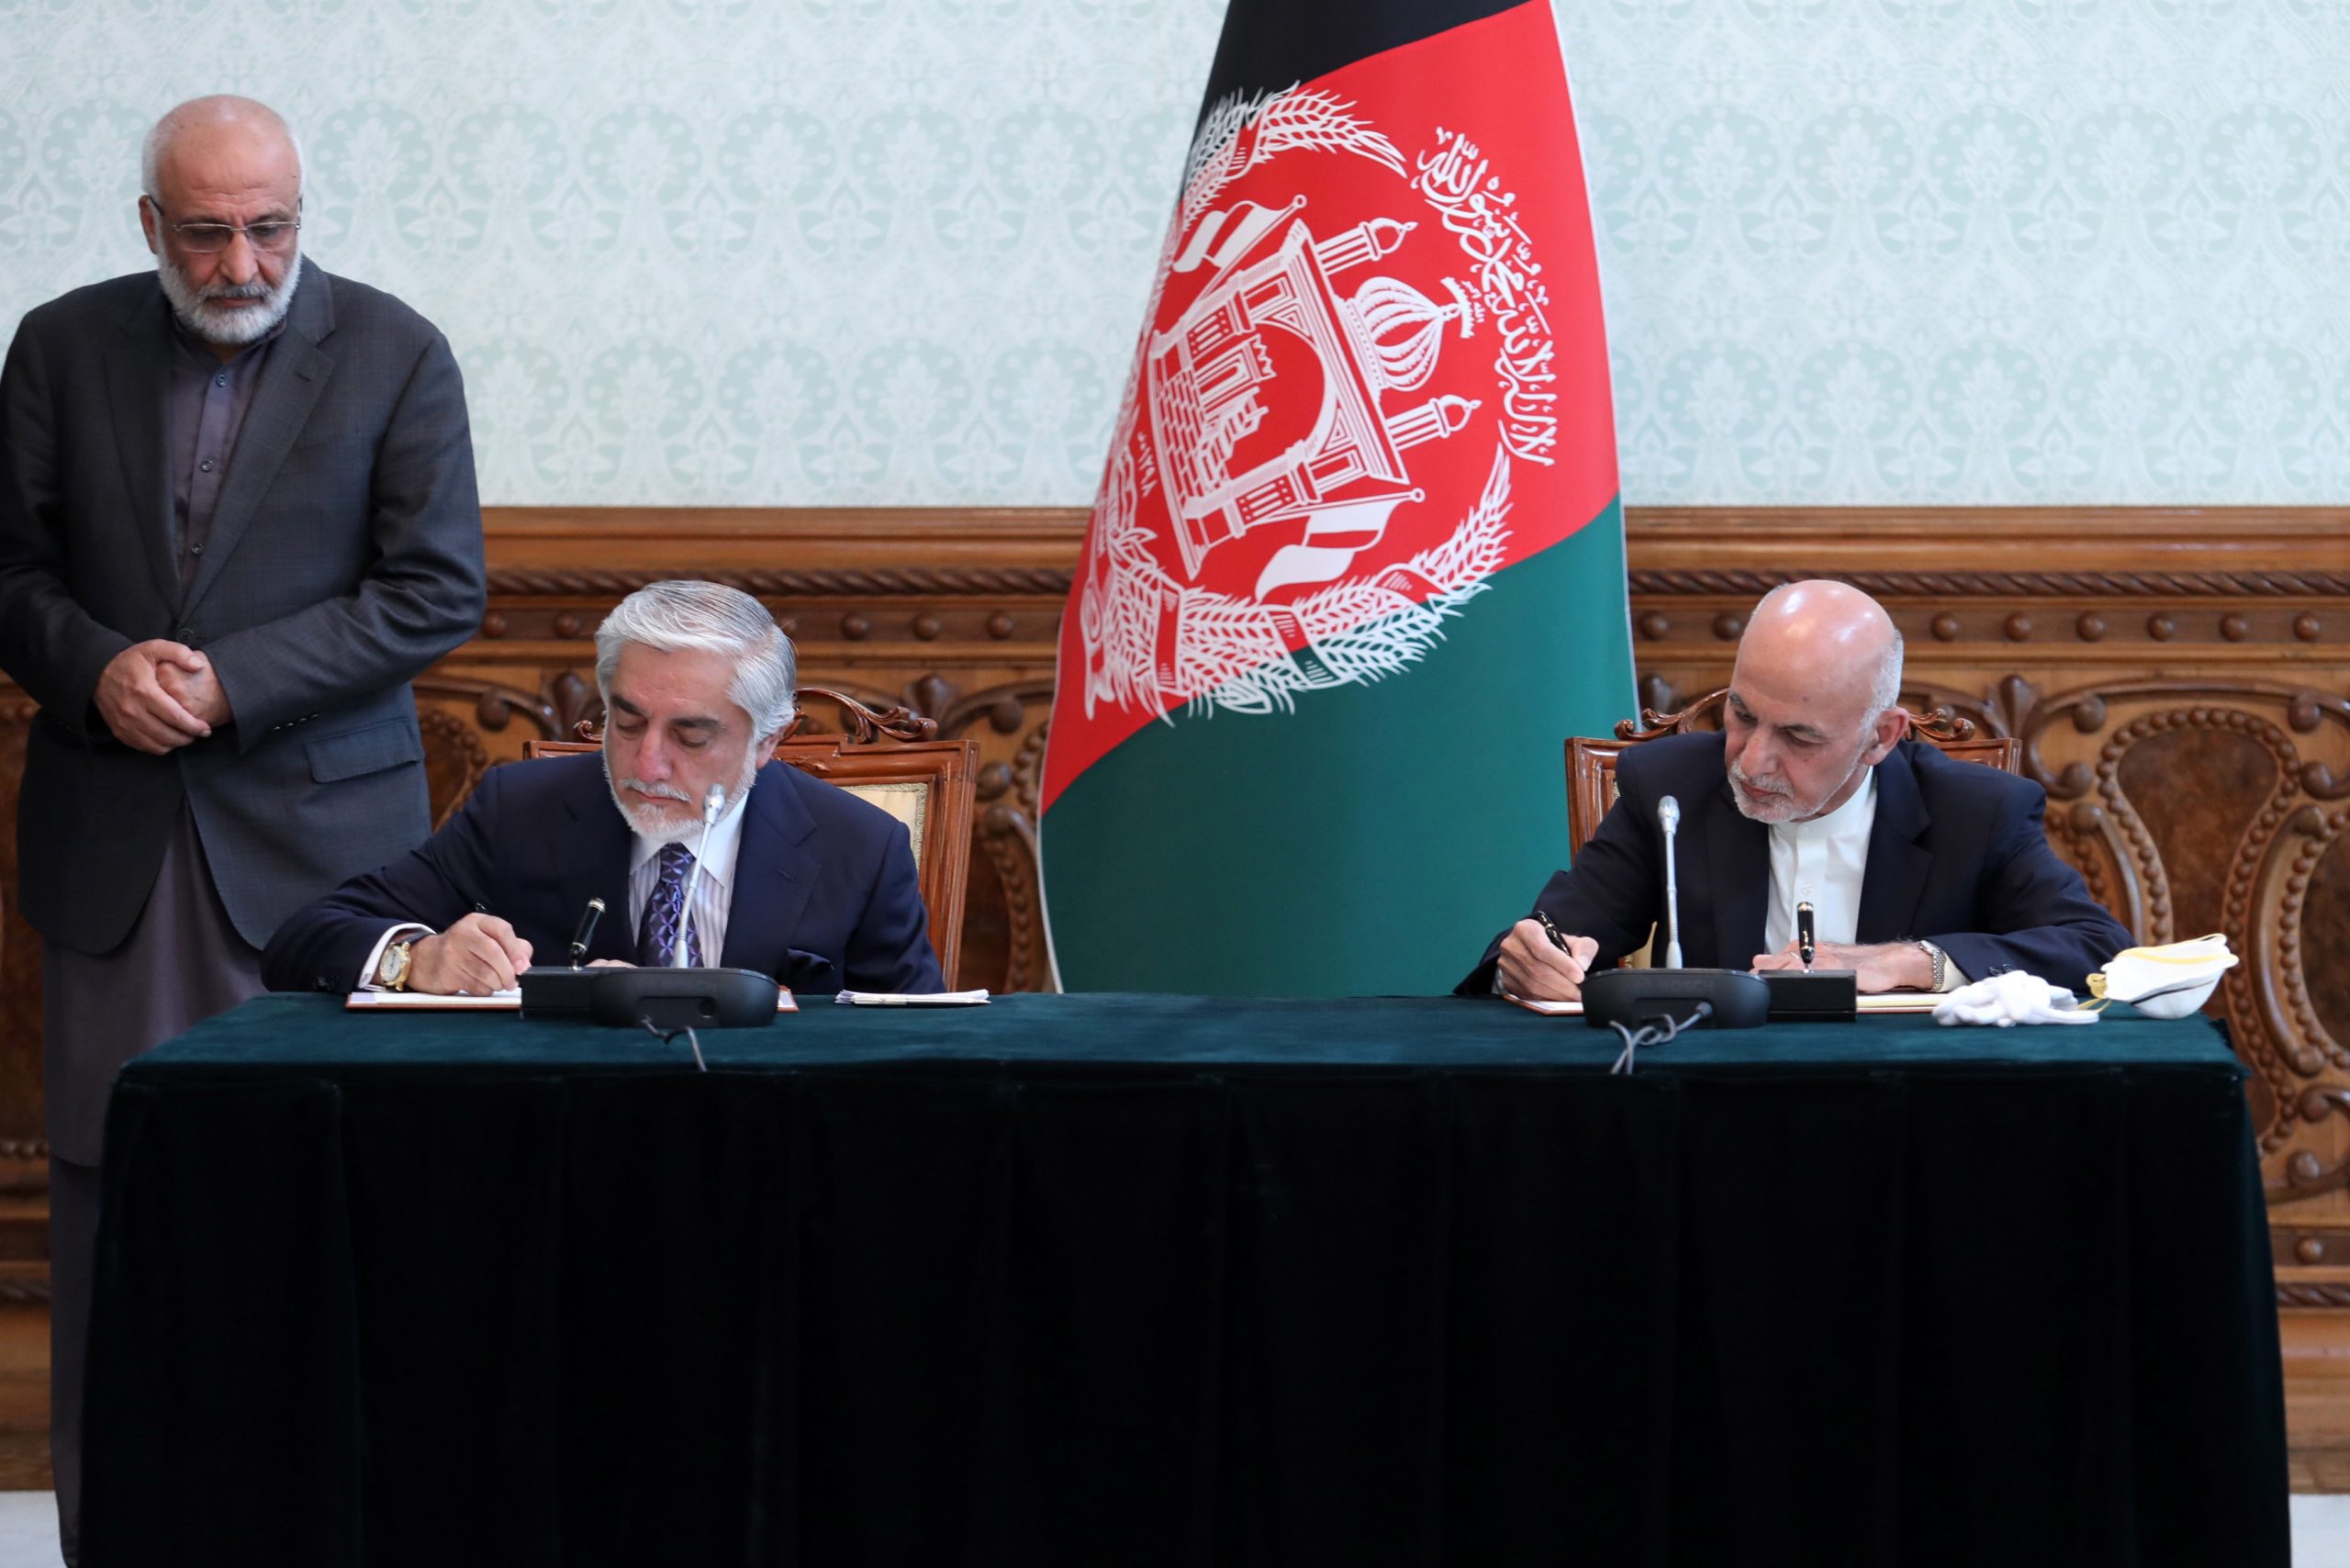 epa08428018 A handout photo made available by the Afghan President's office shows Afghanistan's President Ashraf Ghani (seated, R) and Abdullah Abdullah (seated, L), the second most voted in the September 2019's elections, signing an agreement during a meeting in Kabul, Afghanistan, 17 May 2020. President Ghazni and Abdullah Abdullah reached an agreement to end months of stalemate over the outcome of the vote. According to the agreemet Dr. Abdullah will lead the National Reconciliation High Council and members of his team will be included in the cabinet.  EPA/PRESIDENTIAL PALACE / HANDOUT HANDOUT  HANDOUT EDITORIAL USE ONLY/NO SALES